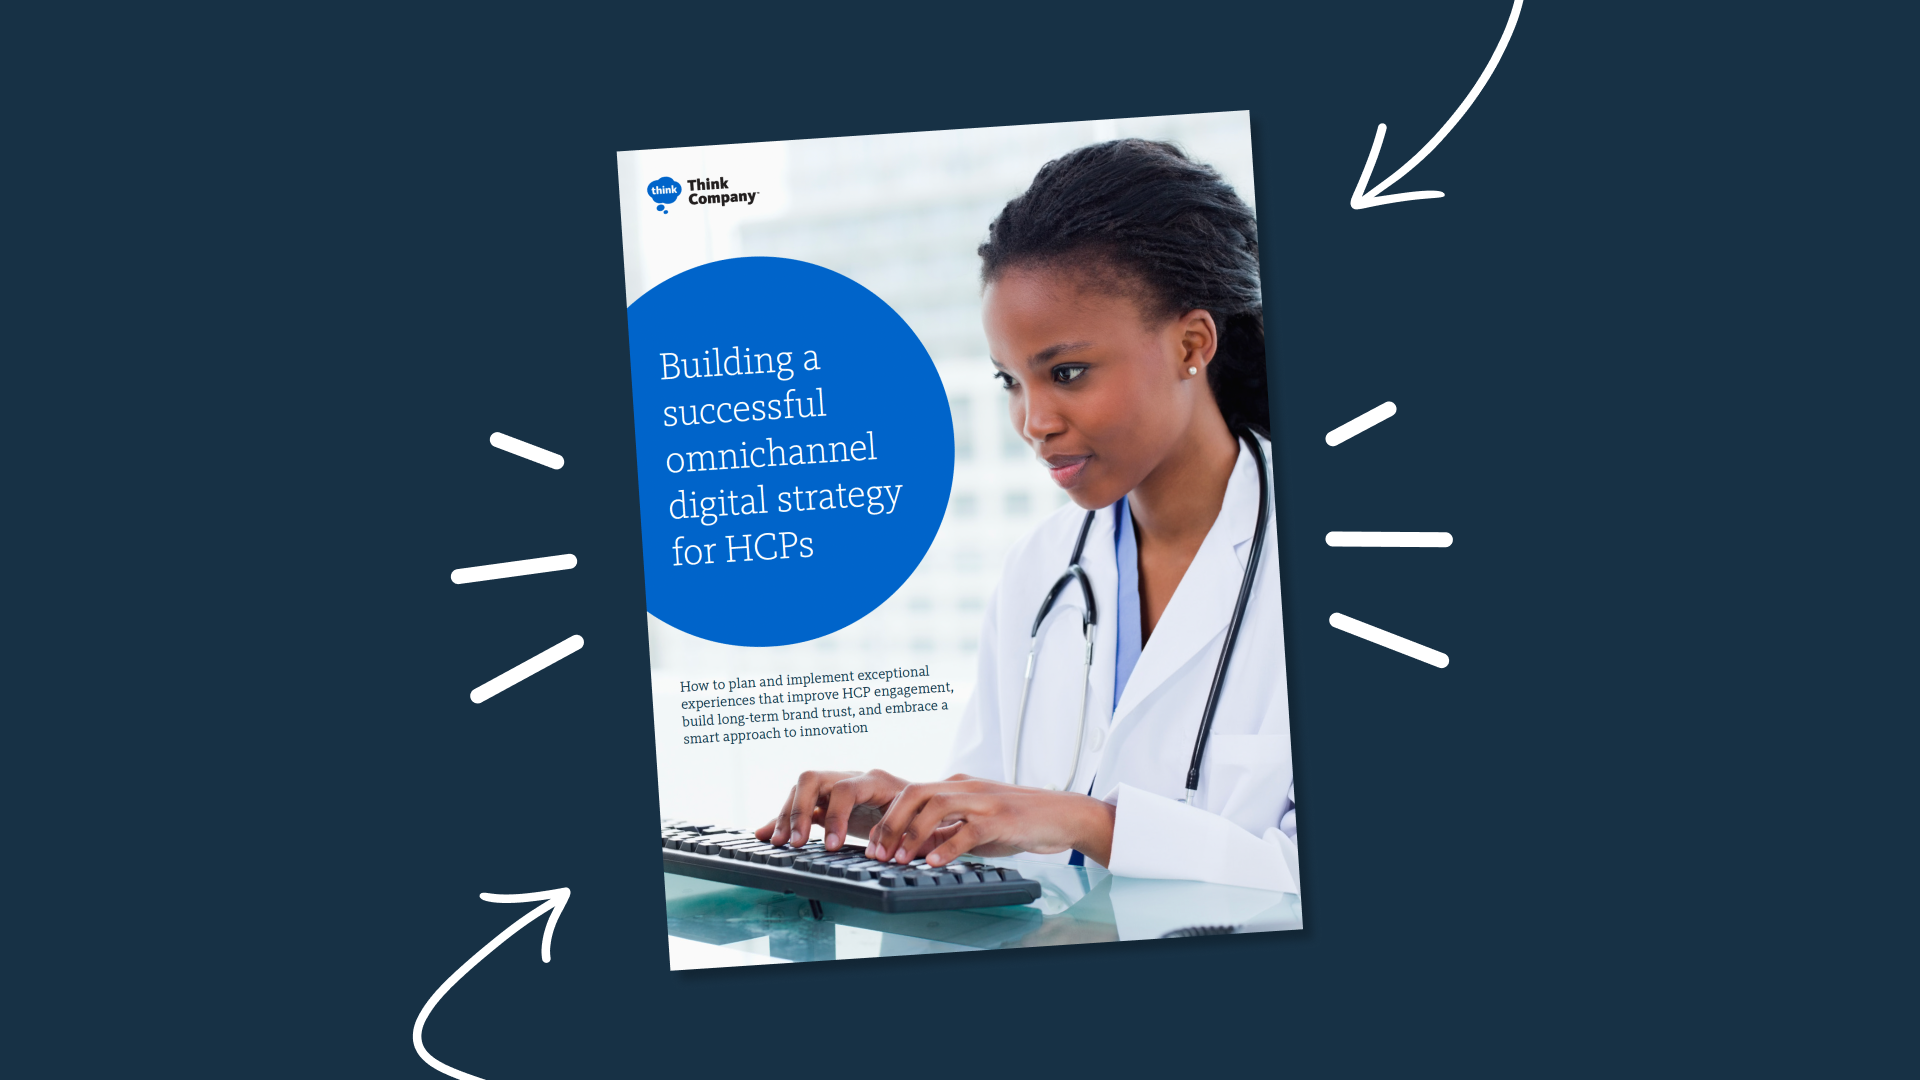 Building a successful omnichannel digital strategy for HCPs book cover with a HCP working on a computer